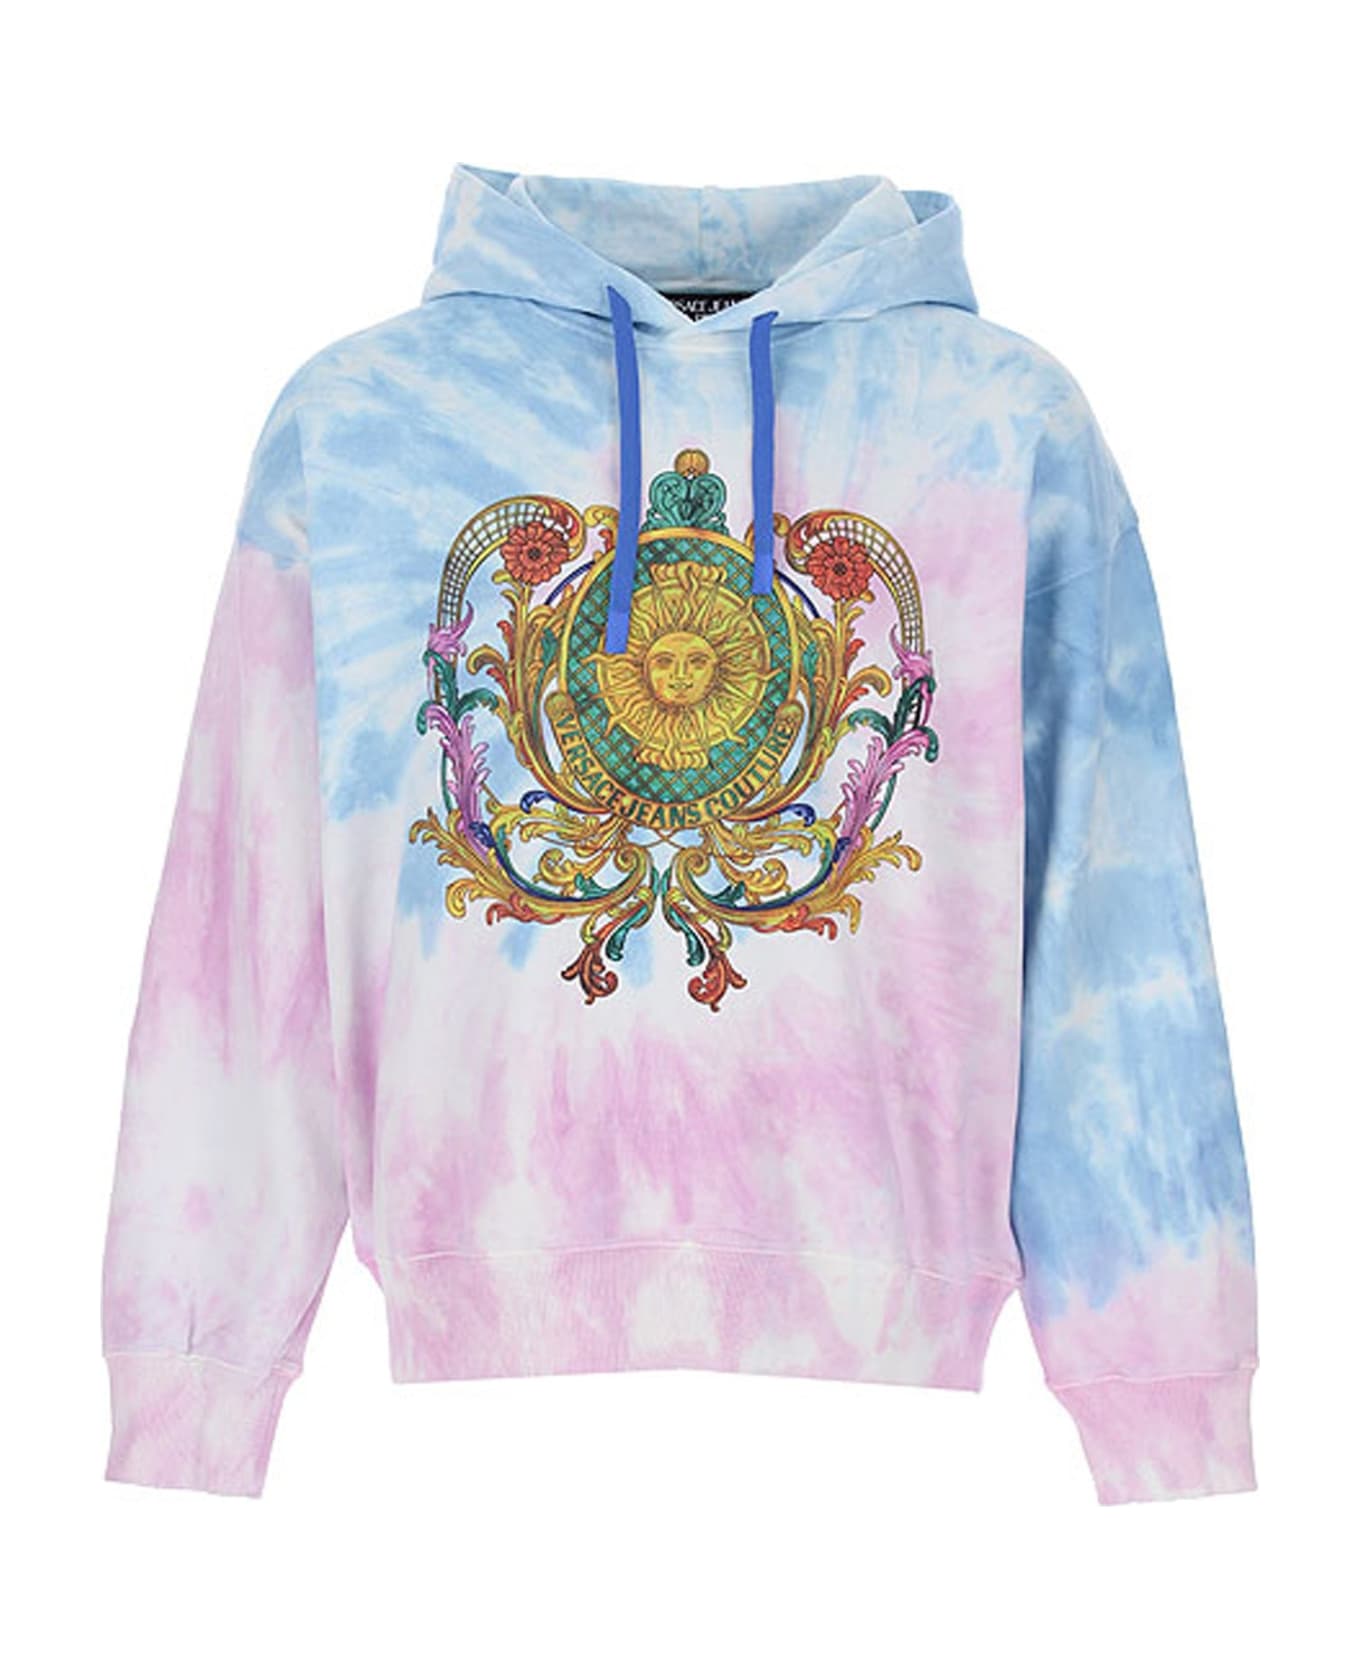 Versace Jeans Couture Jeans Couture Hooded Sweatshirt - Blue